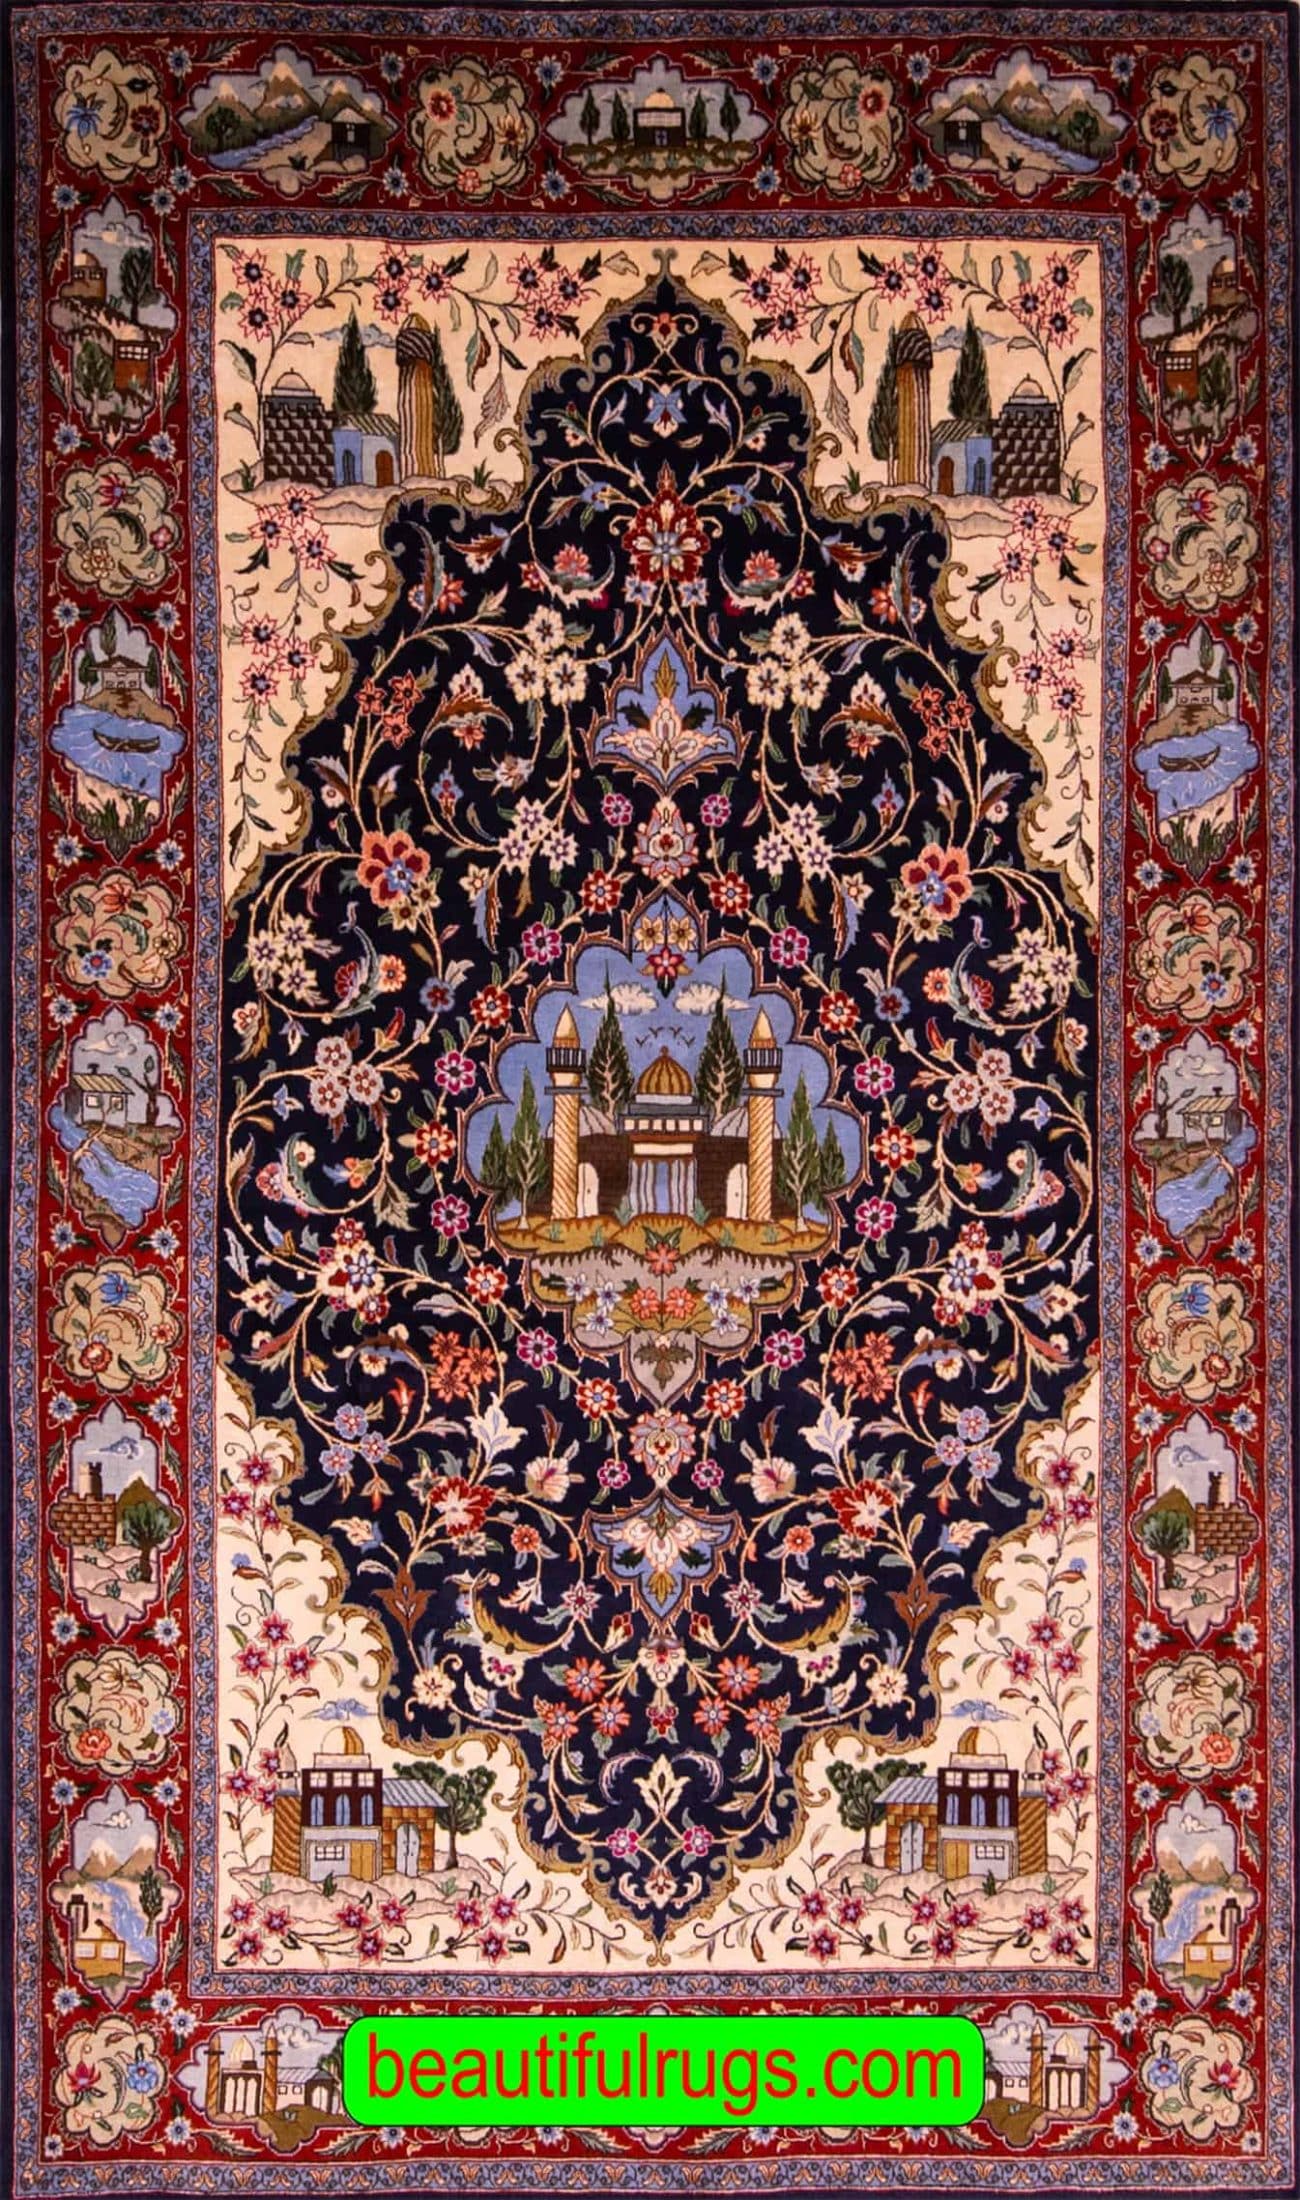 https://beautifulrugs.com/wp-content/uploads/2022/05/products-184-1-Persian-Qum-scaled.jpg